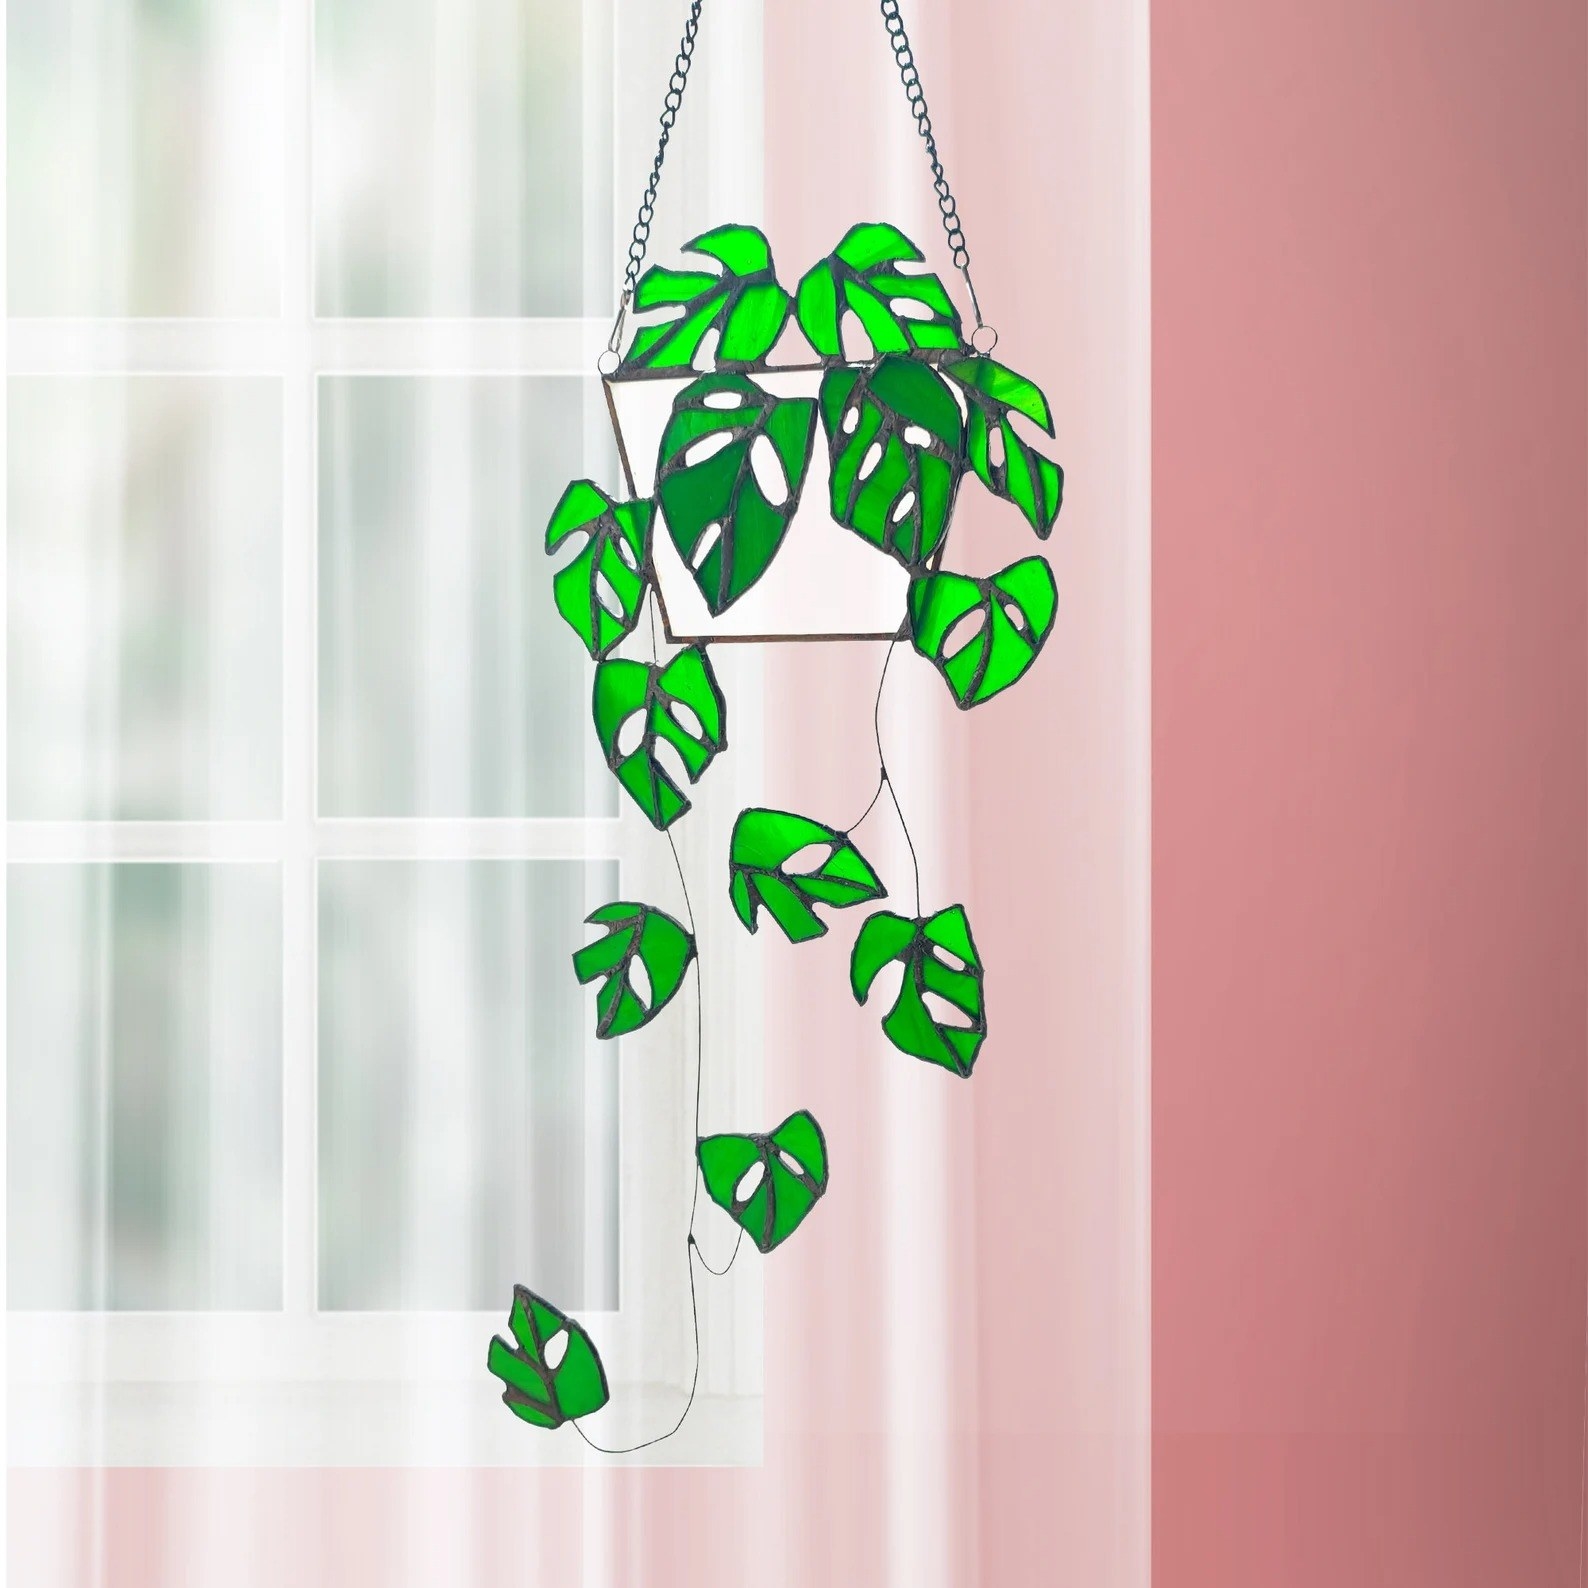 A piece of green stained glass art in the shape of a plant is shown